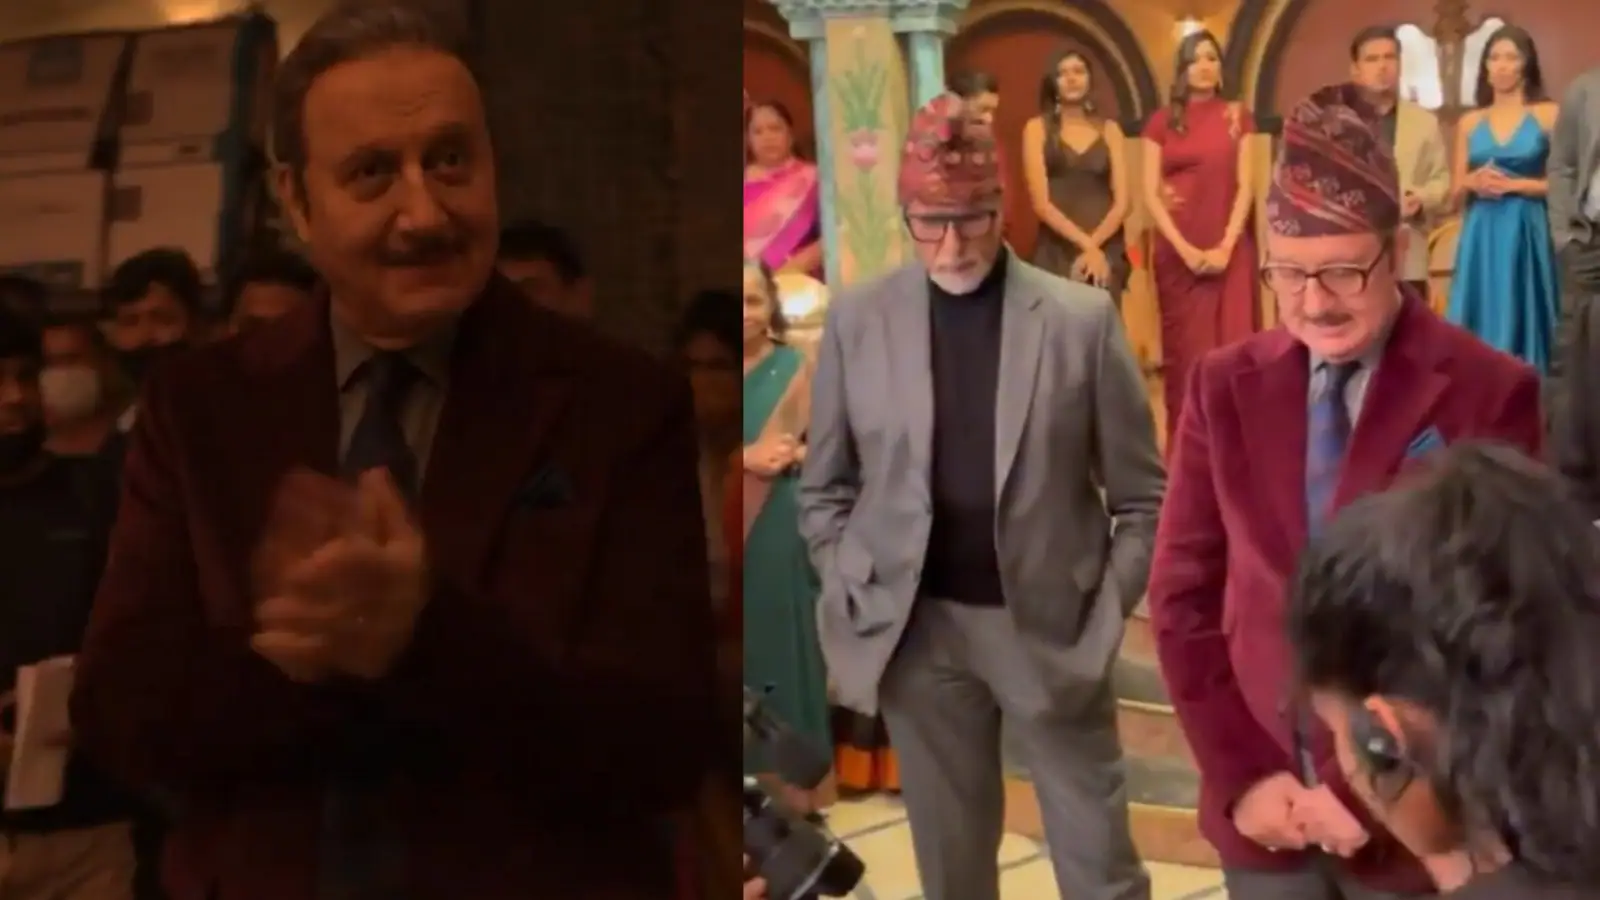 Anupam Kher shares glimpse of his birthday celebrations from Uunchai sets: ‘I feel blessed’. Watch